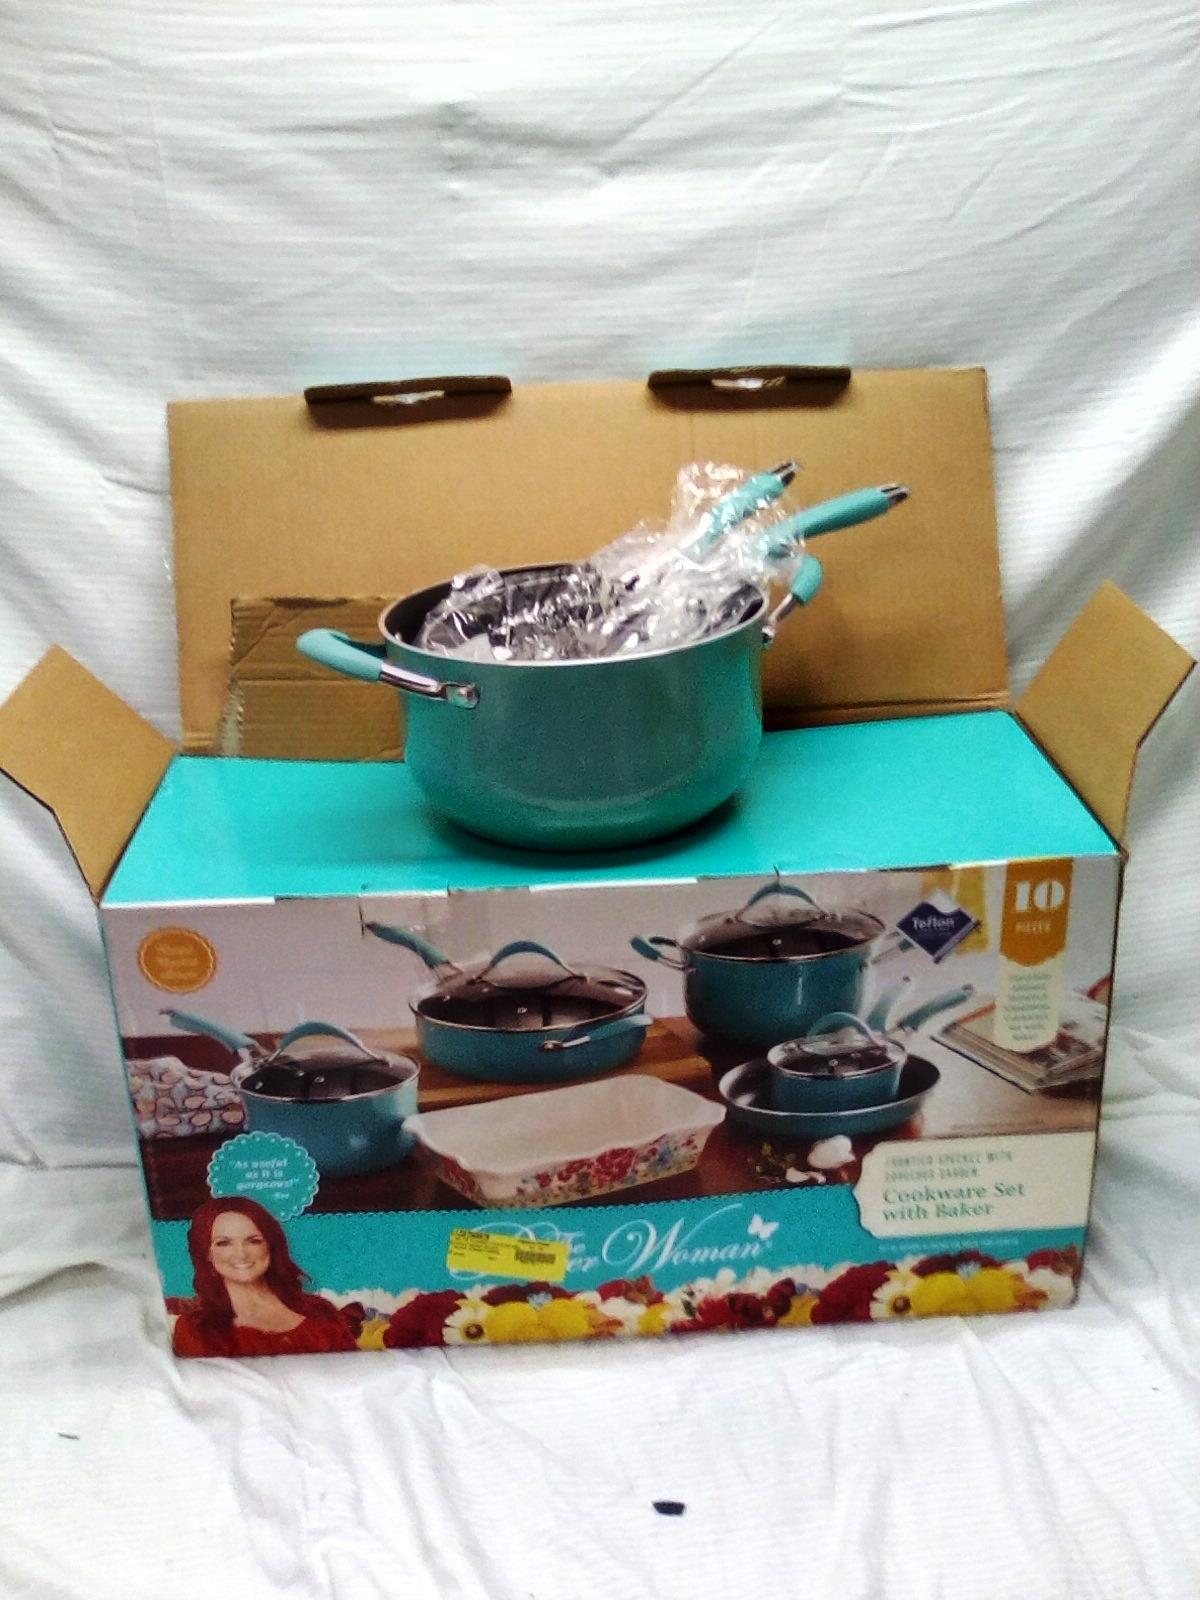 10pc Pioneer Woman cookware set